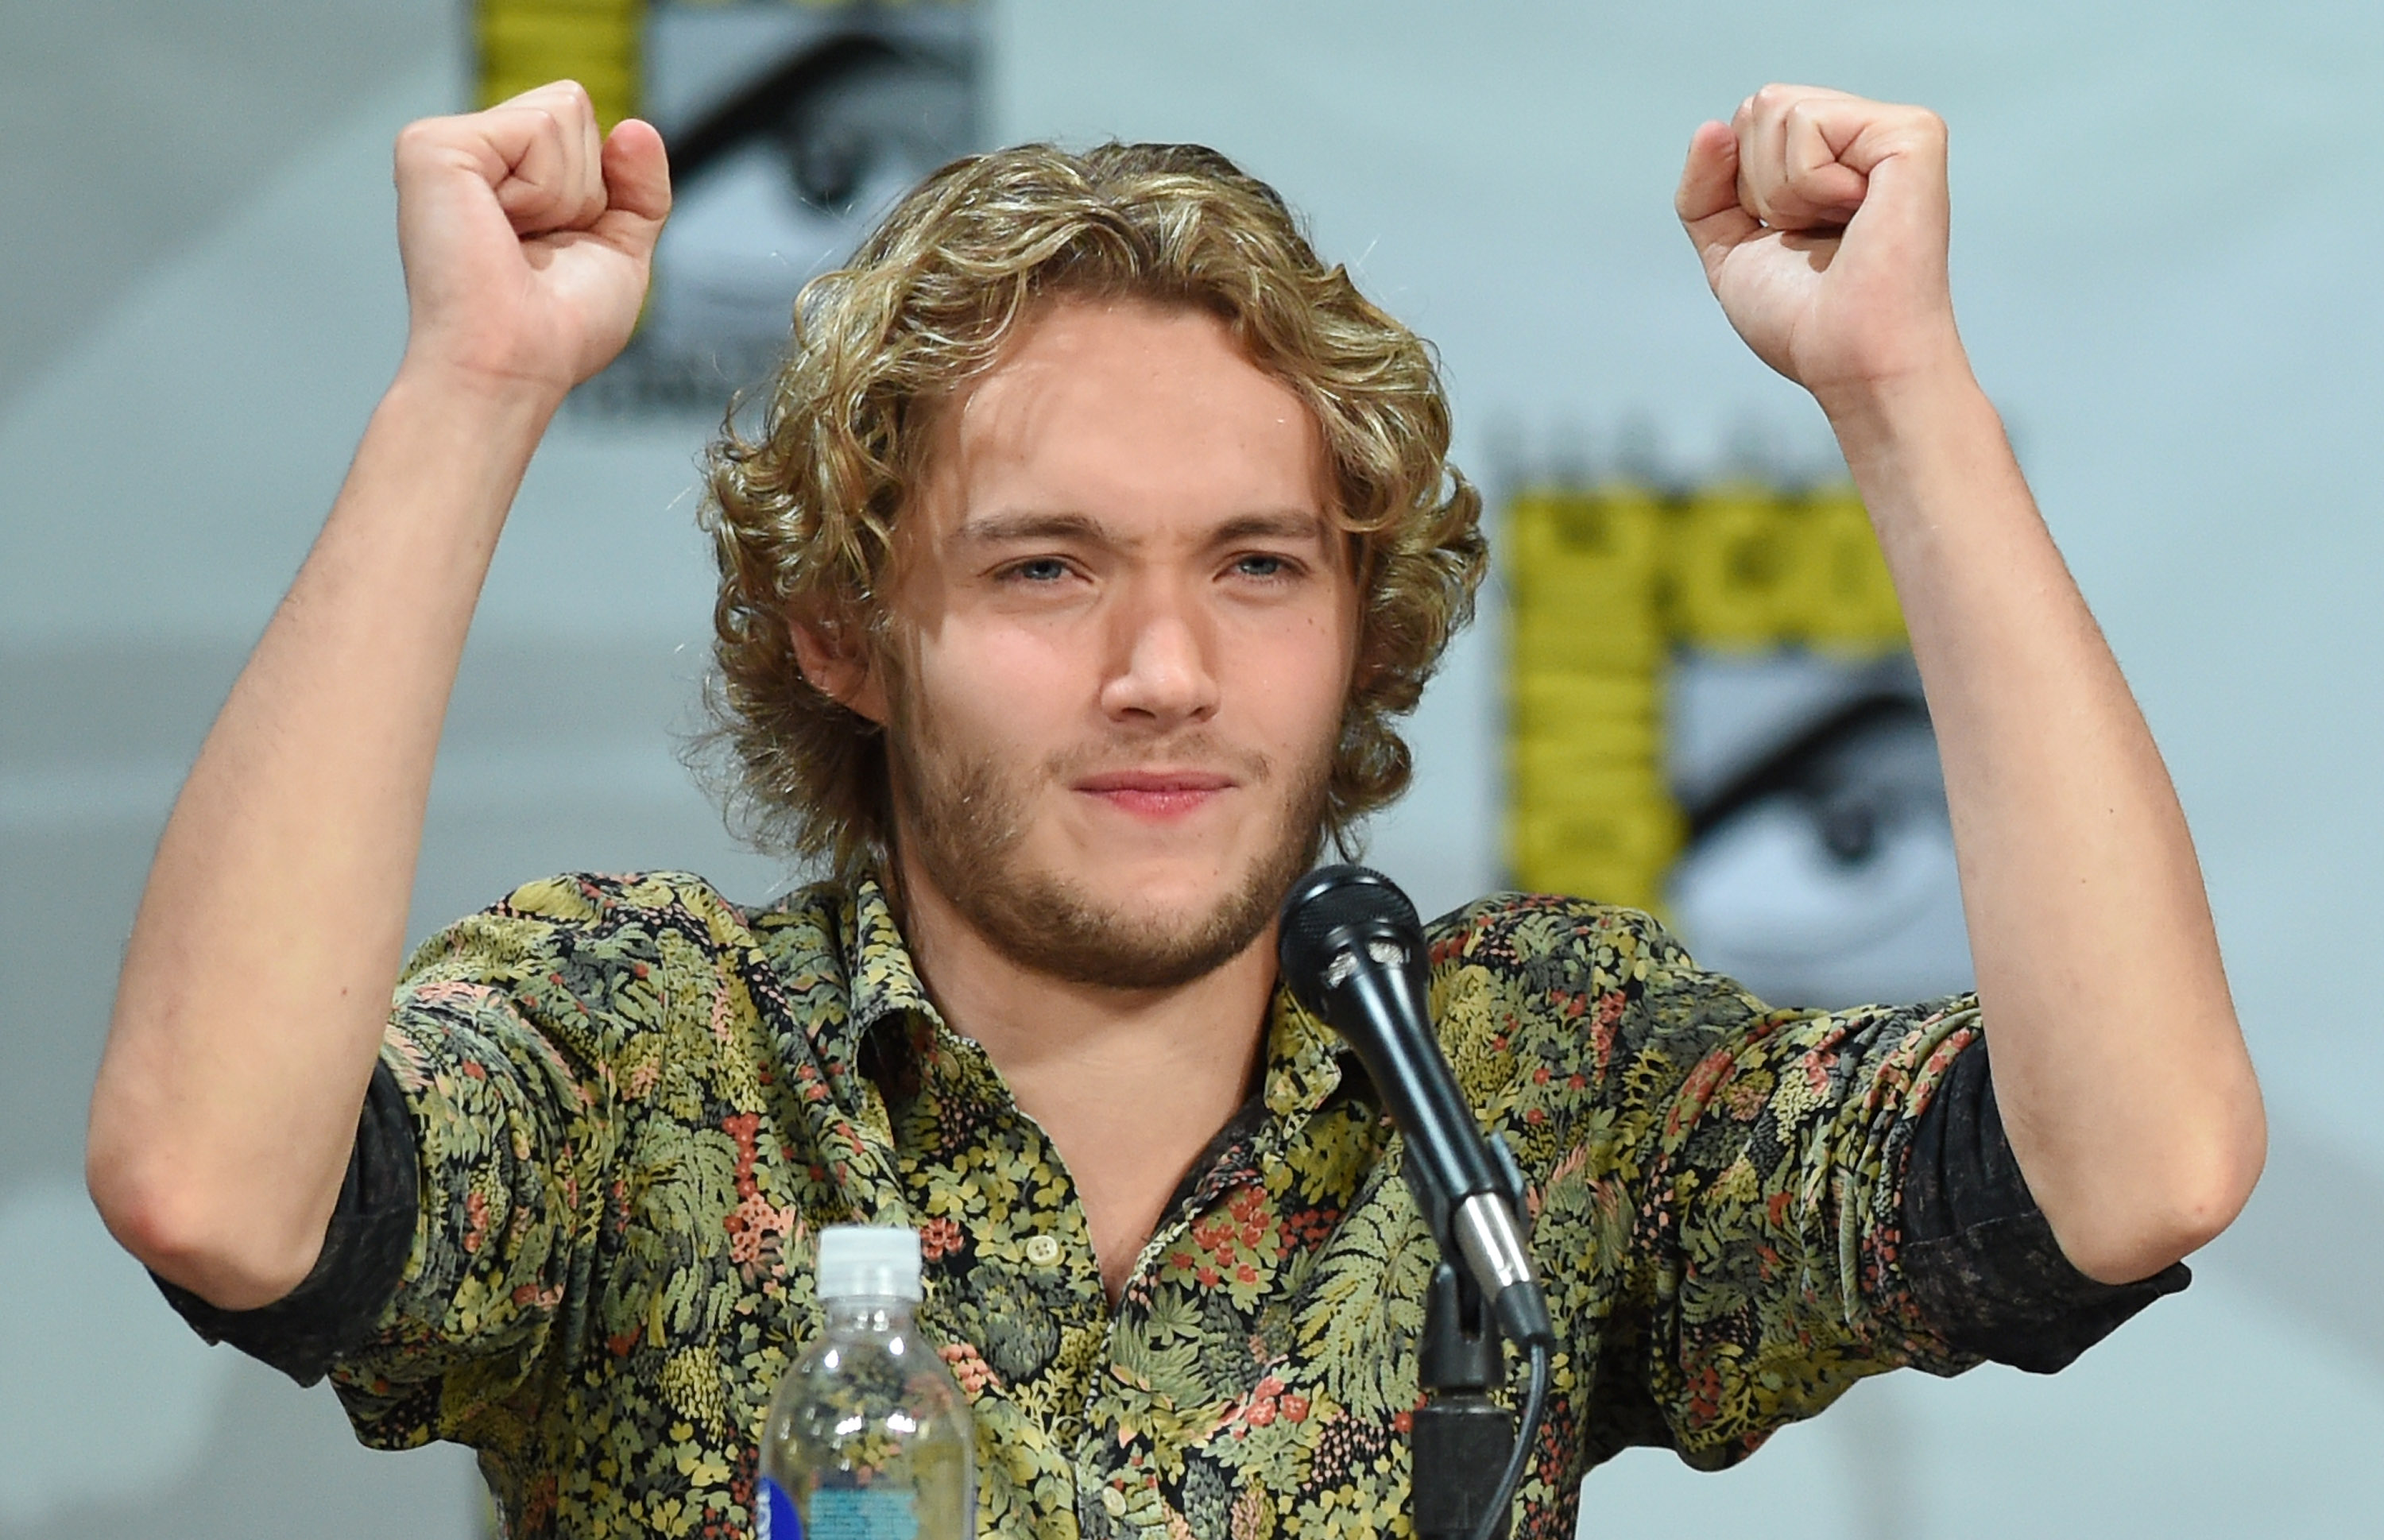 oby Regbo attends The CW's "Reign" exclusive premiere screening and panel during Comic-Con International 2014 at the San Diego Convention Center on July 24, 2014 in San Diego, California. (Ethan Miller—Getty Images)